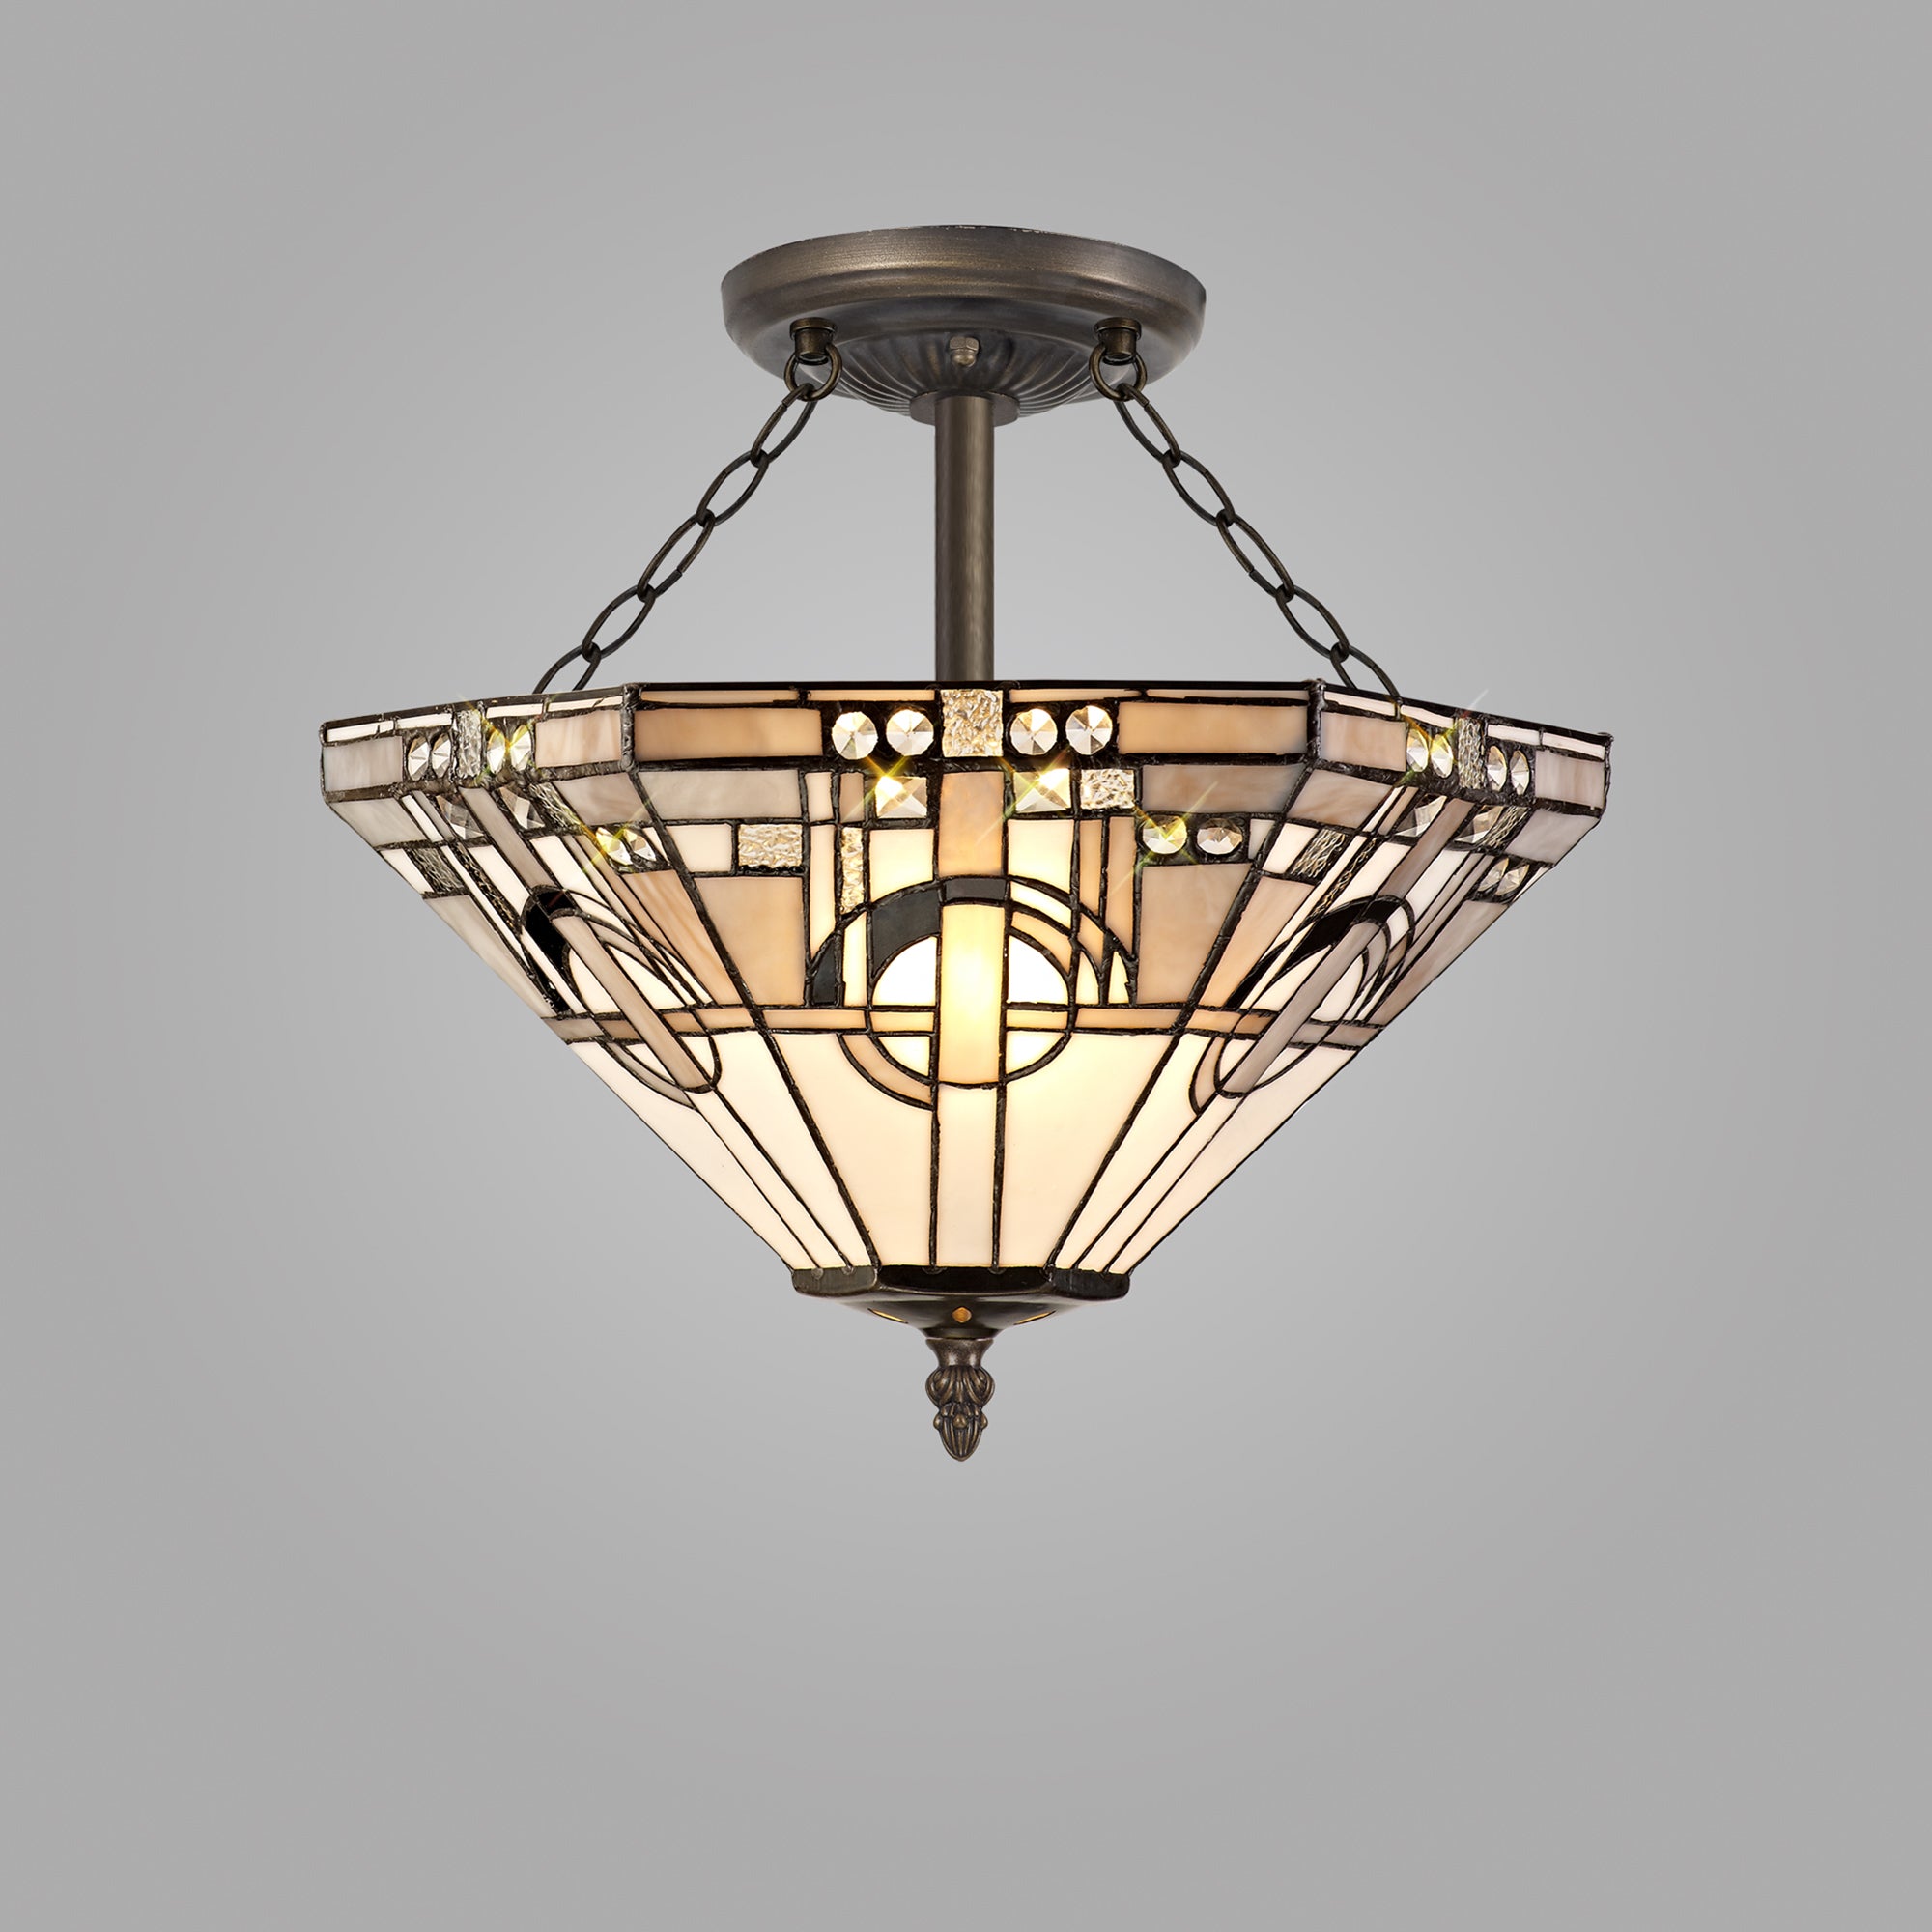 Atek 3 Light E27 Semi Ceiling With Tiffany Shade 40cm Shade, White/Grey/Black/Clear Crystal/Aged Antique Brass